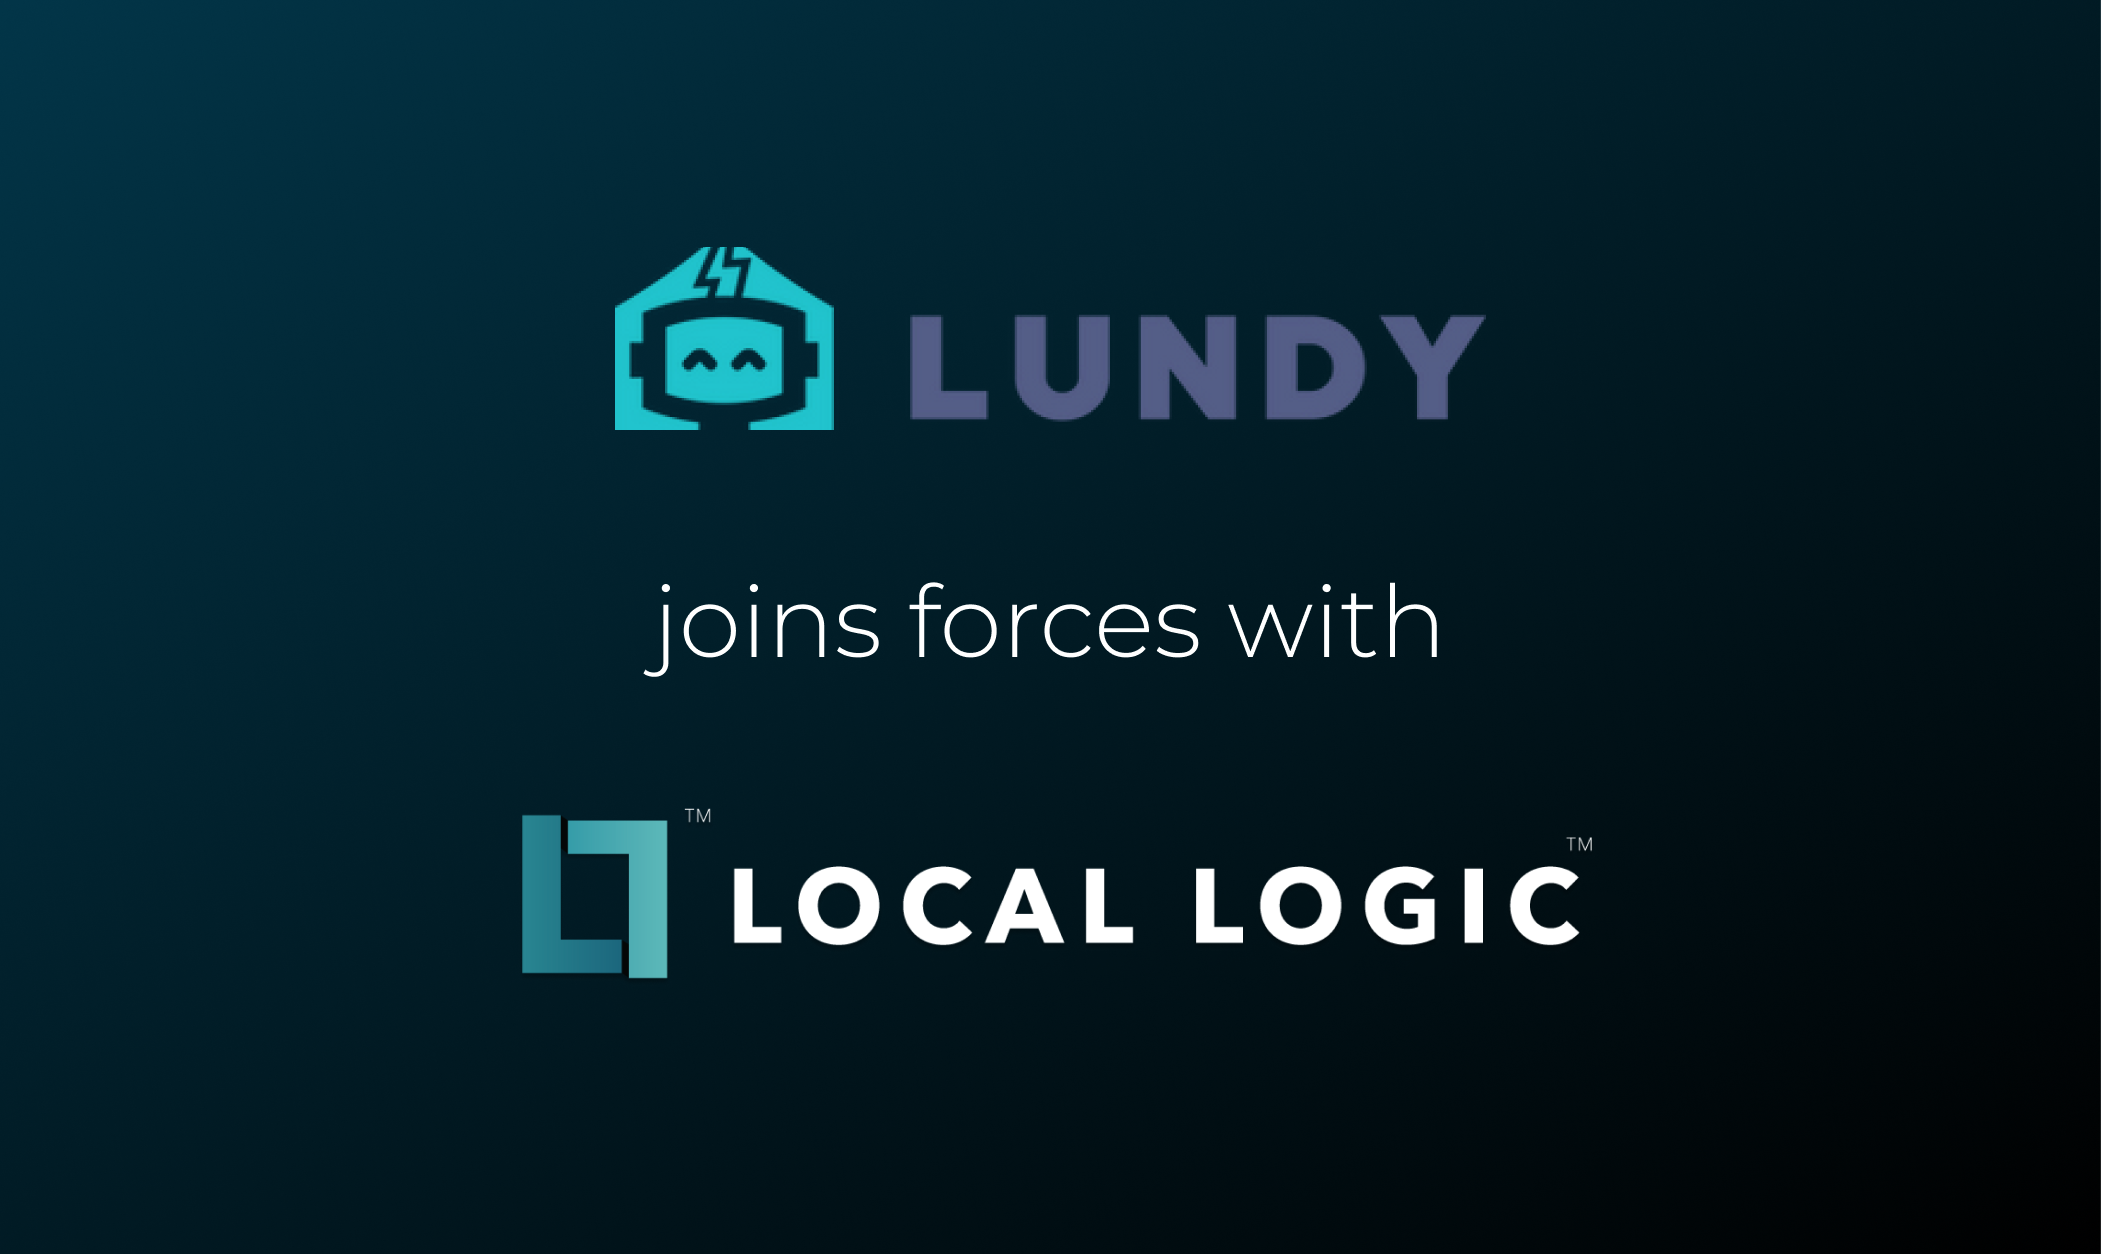 Logo of Lundy on top of text "joins force with" followed by Local Logic logo to announce new partnership between Lundy and Local Logic